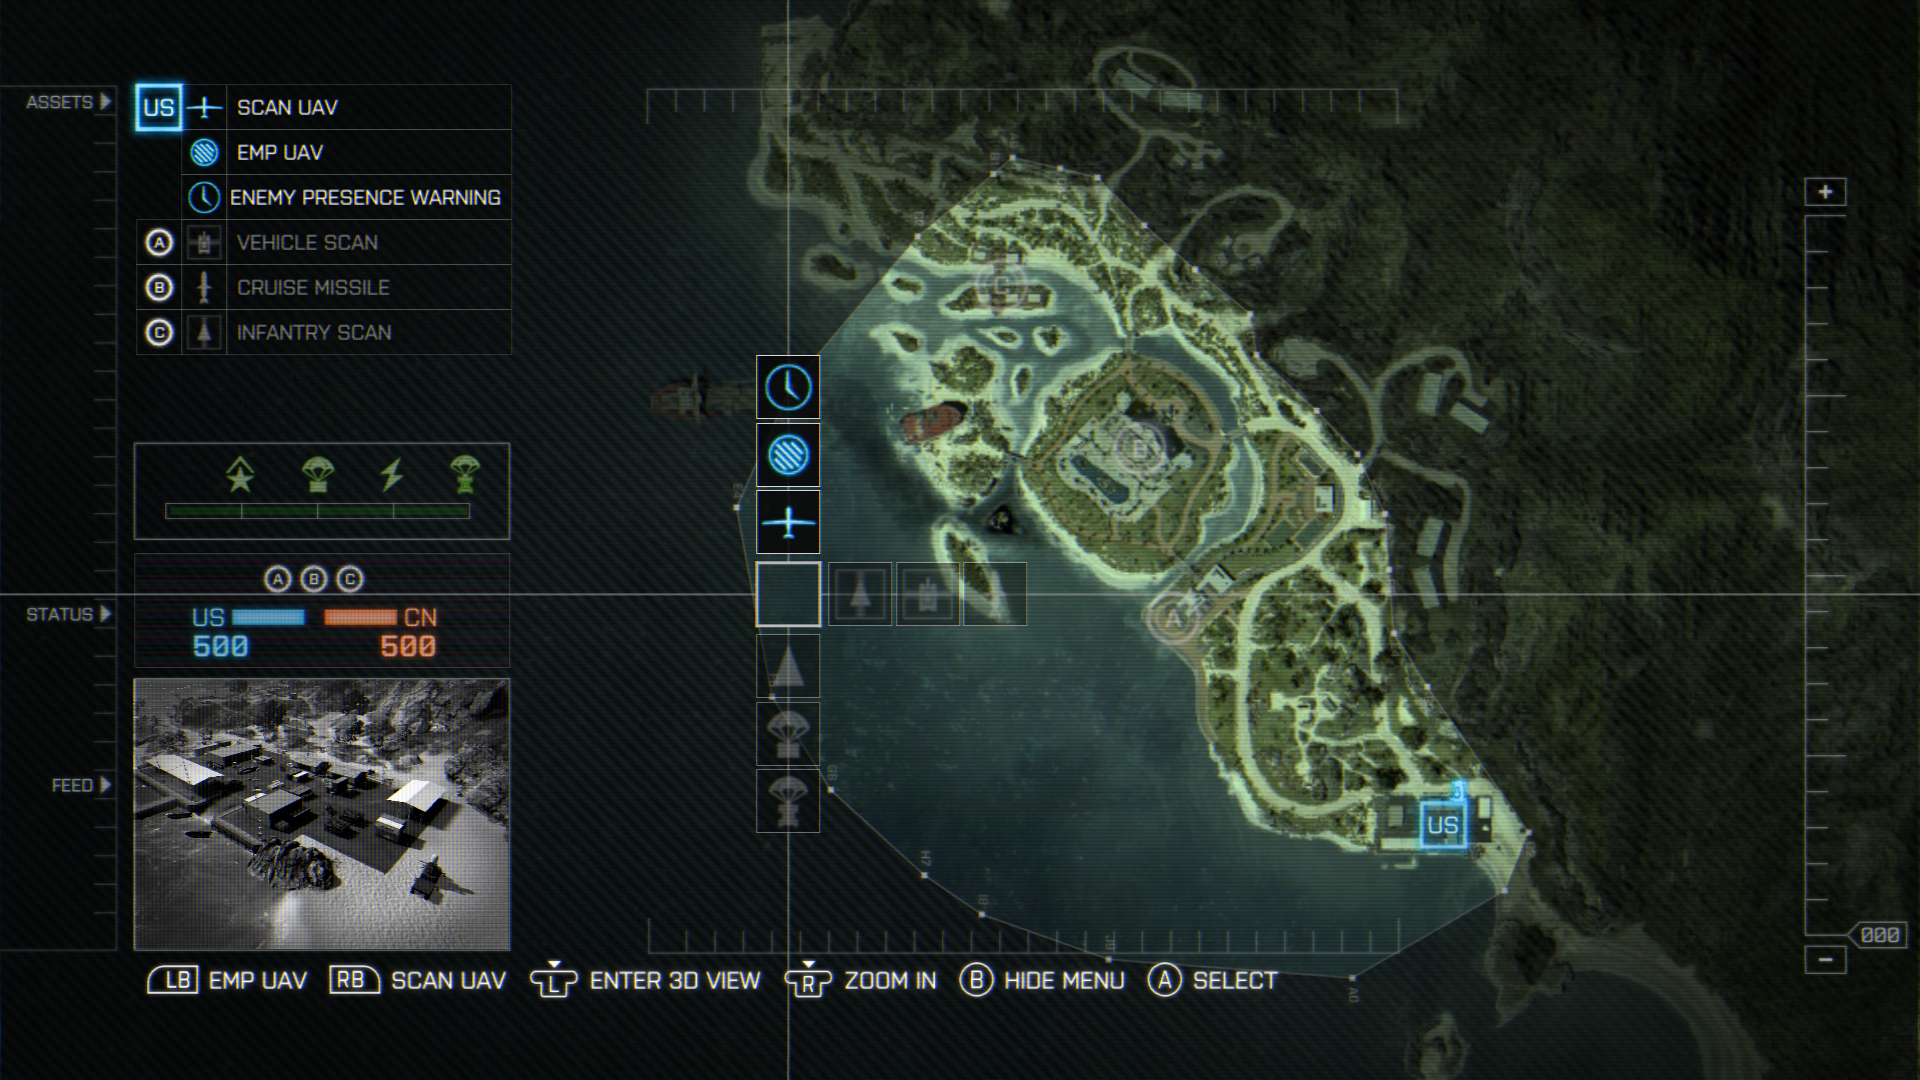 Battlefield 4 Players Can Create and Issue Missions to Friends via Battlelog